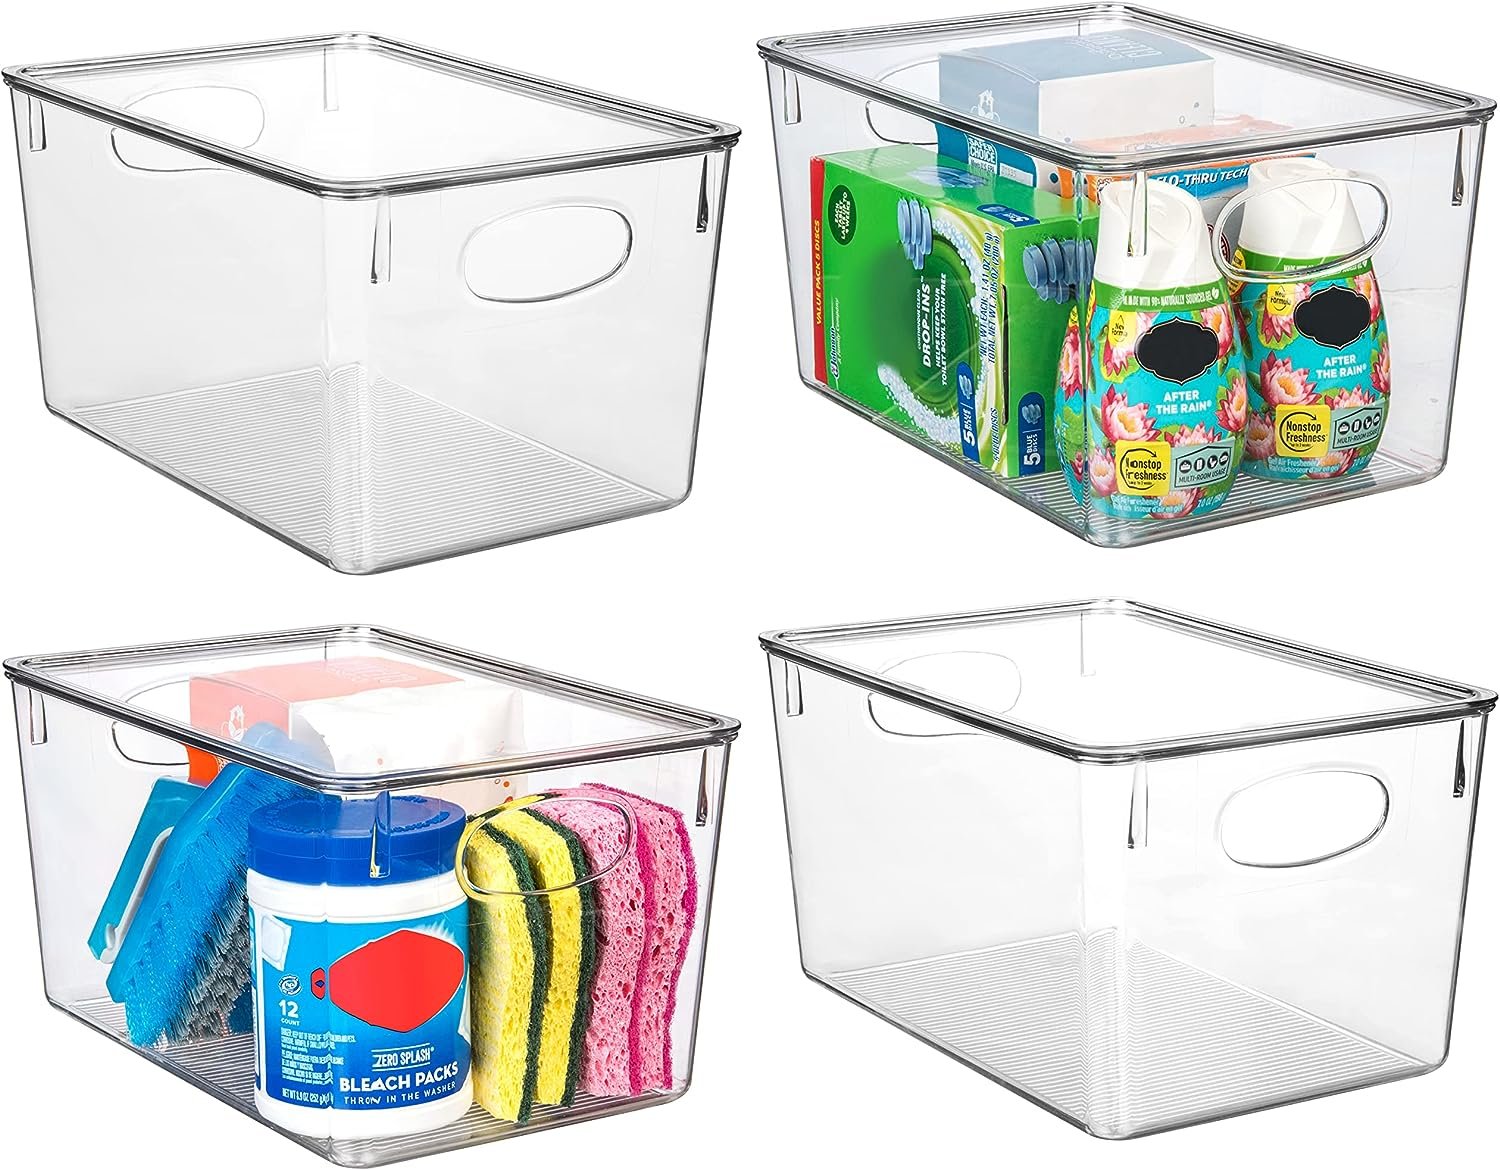 ClearSpace Plastic Storage Bins With lids – Perfect Kitchen Organization or Pantry Storage – Fridge Organizer, Pantry Organization and Storage Bins, Cabinet Organizers